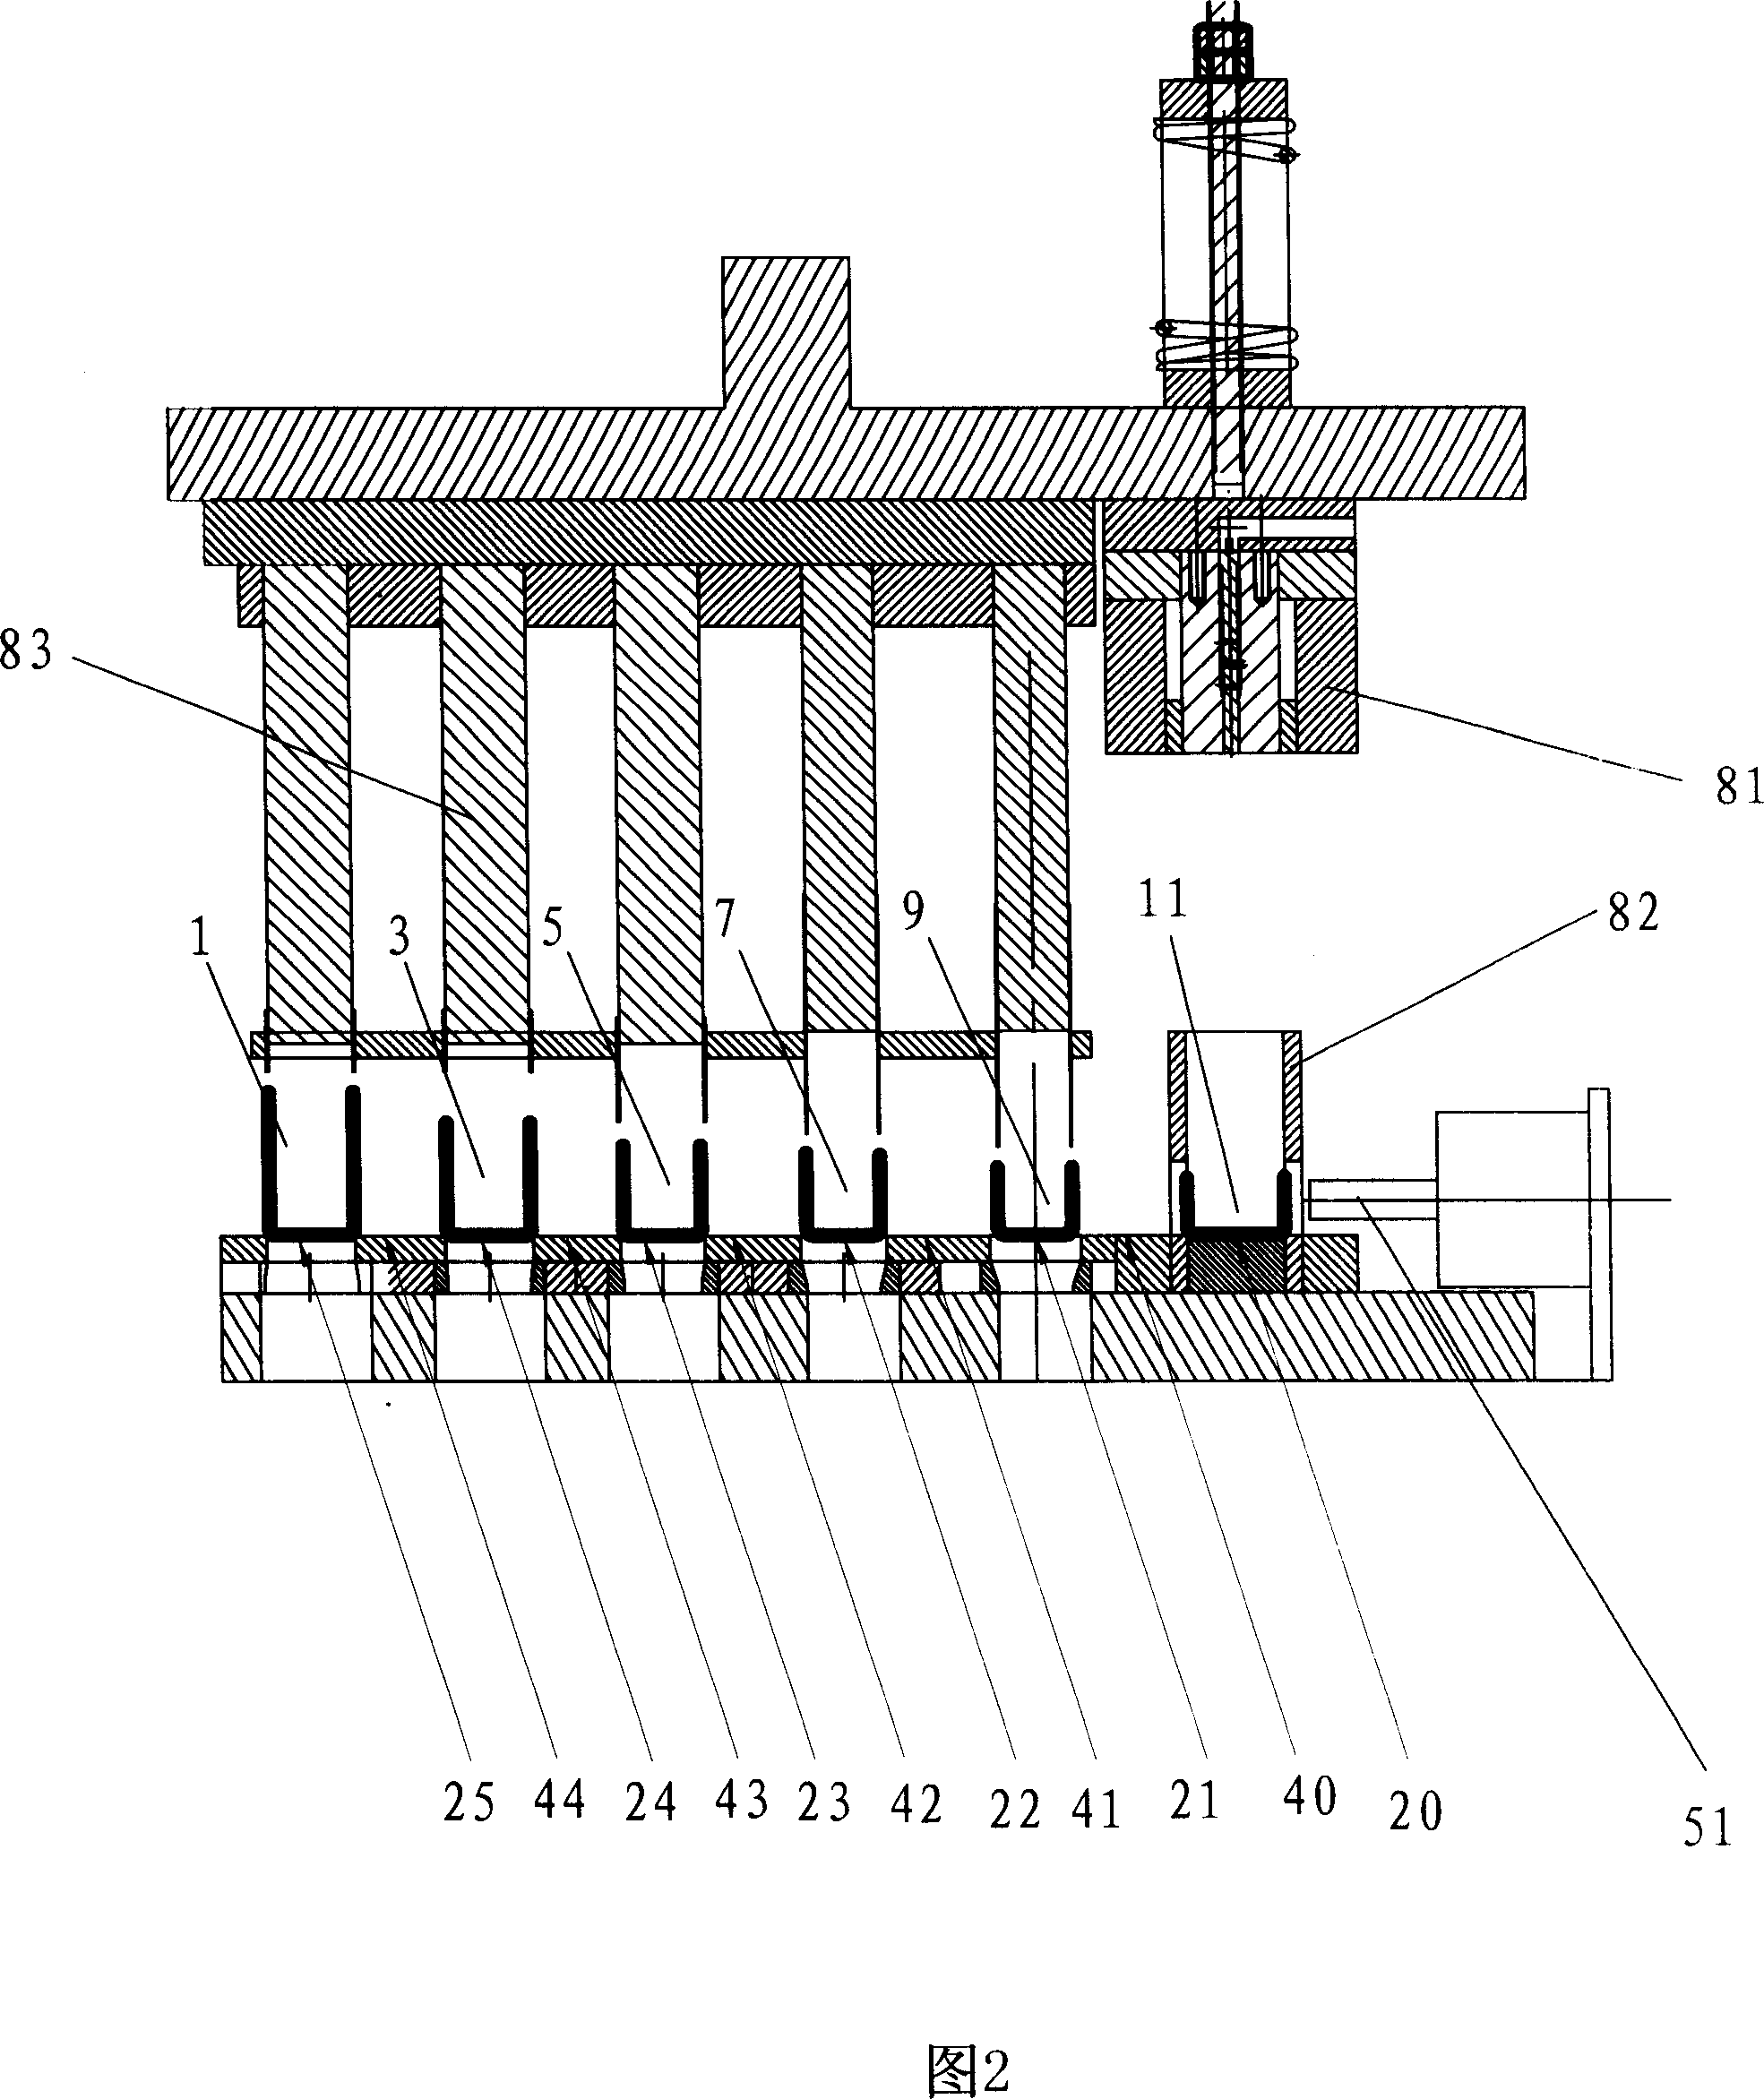 Feeding method for multiple site punching of drawn hardware piece